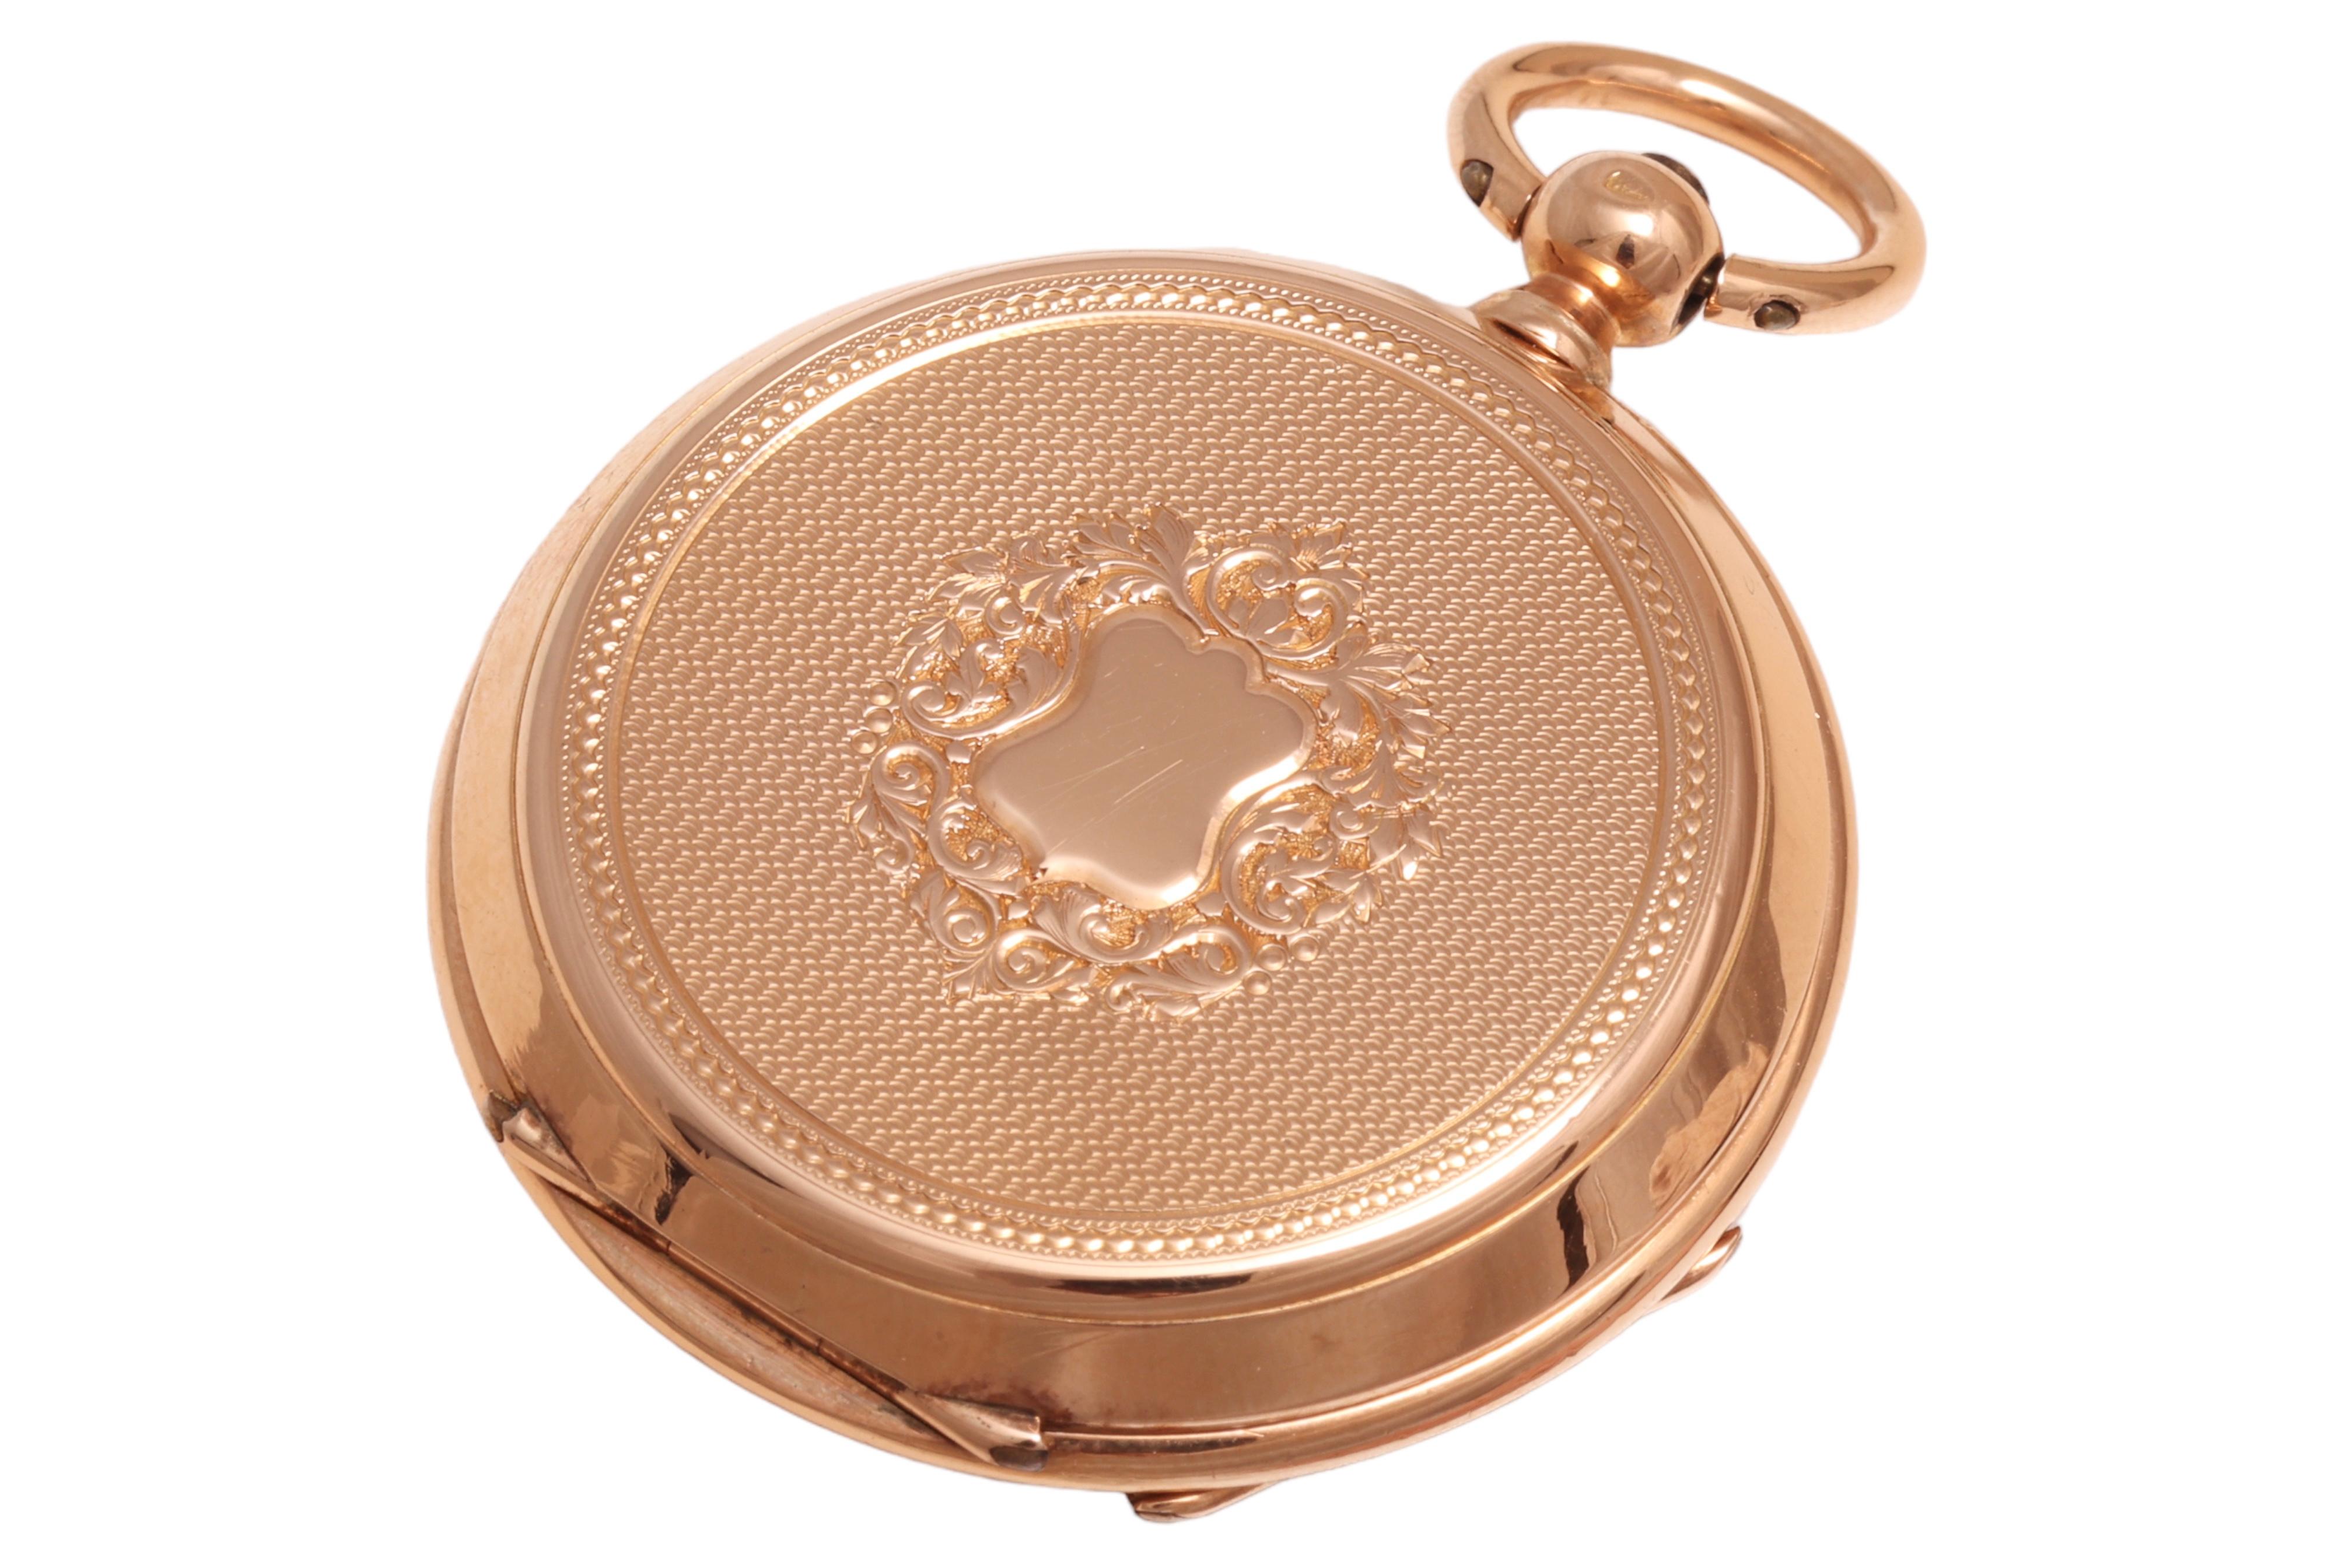 14 Kt Solid Pink Gold Delaunay Chauveau Ruffec pocket watch For Sale 5